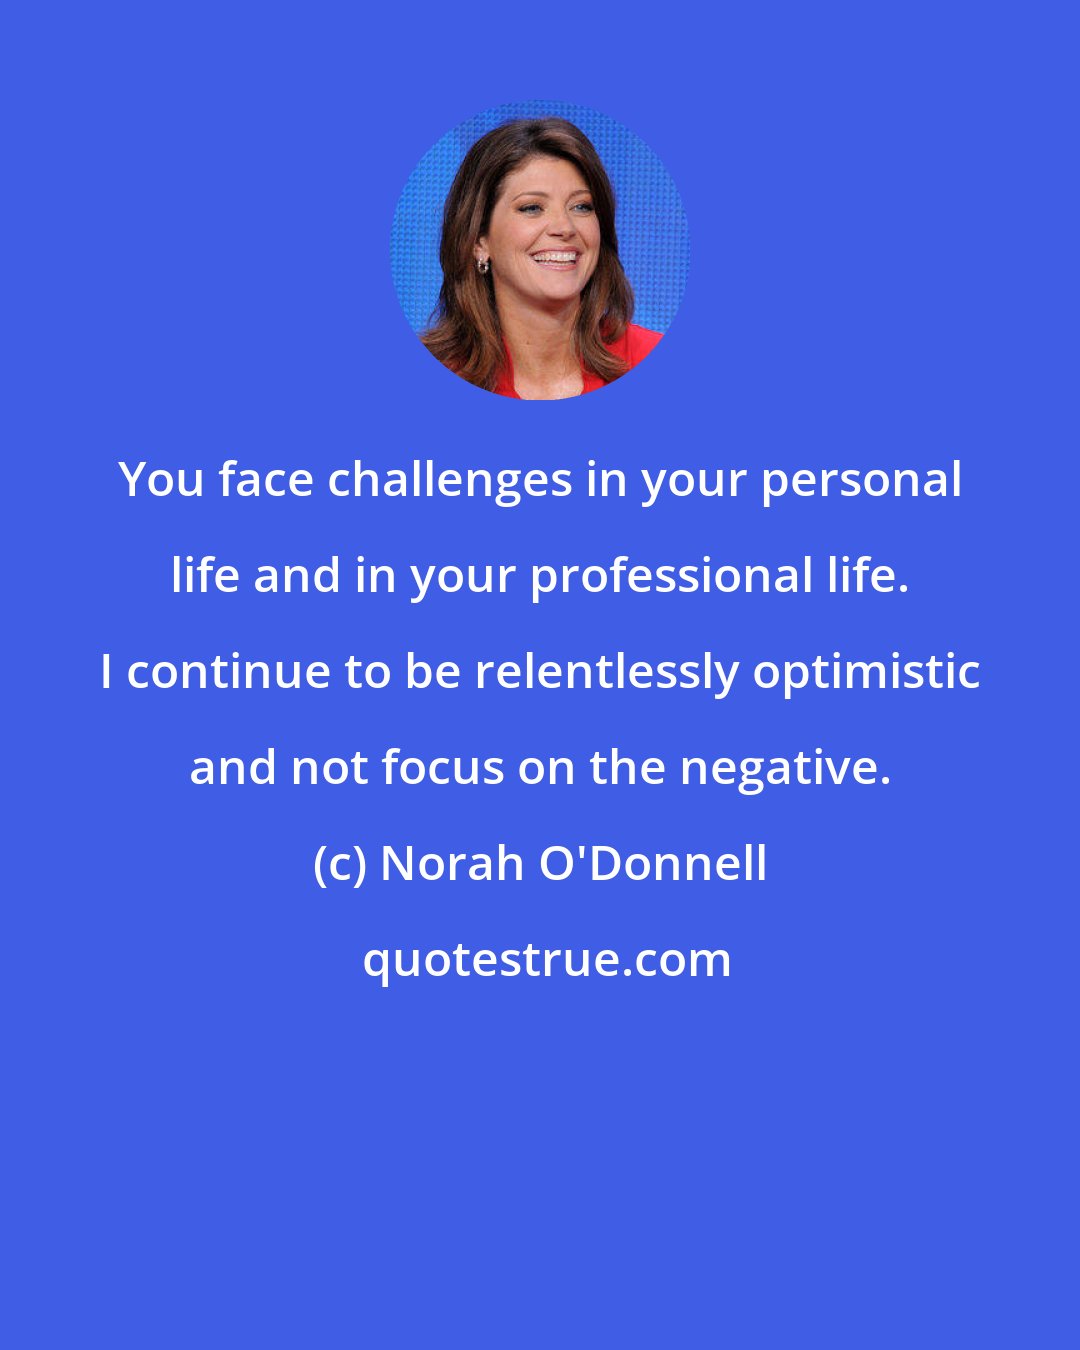 Norah O'Donnell: You face challenges in your personal life and in your professional life. I continue to be relentlessly optimistic and not focus on the negative.